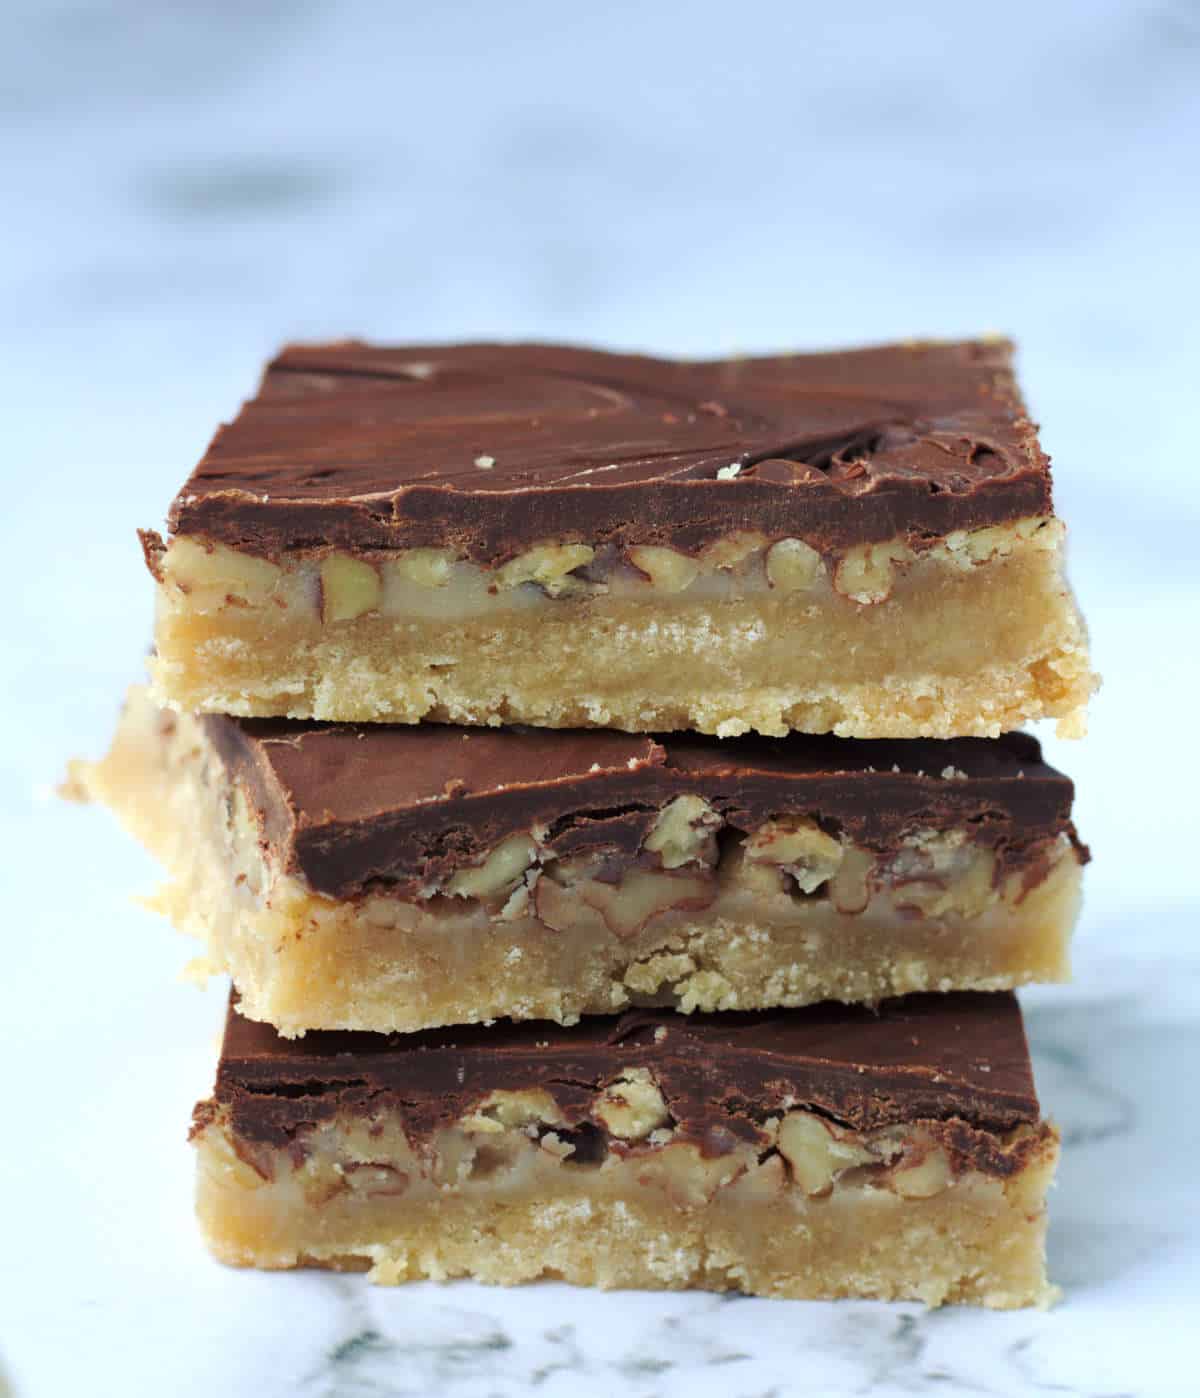 A stack of three bars, one on top of each other.